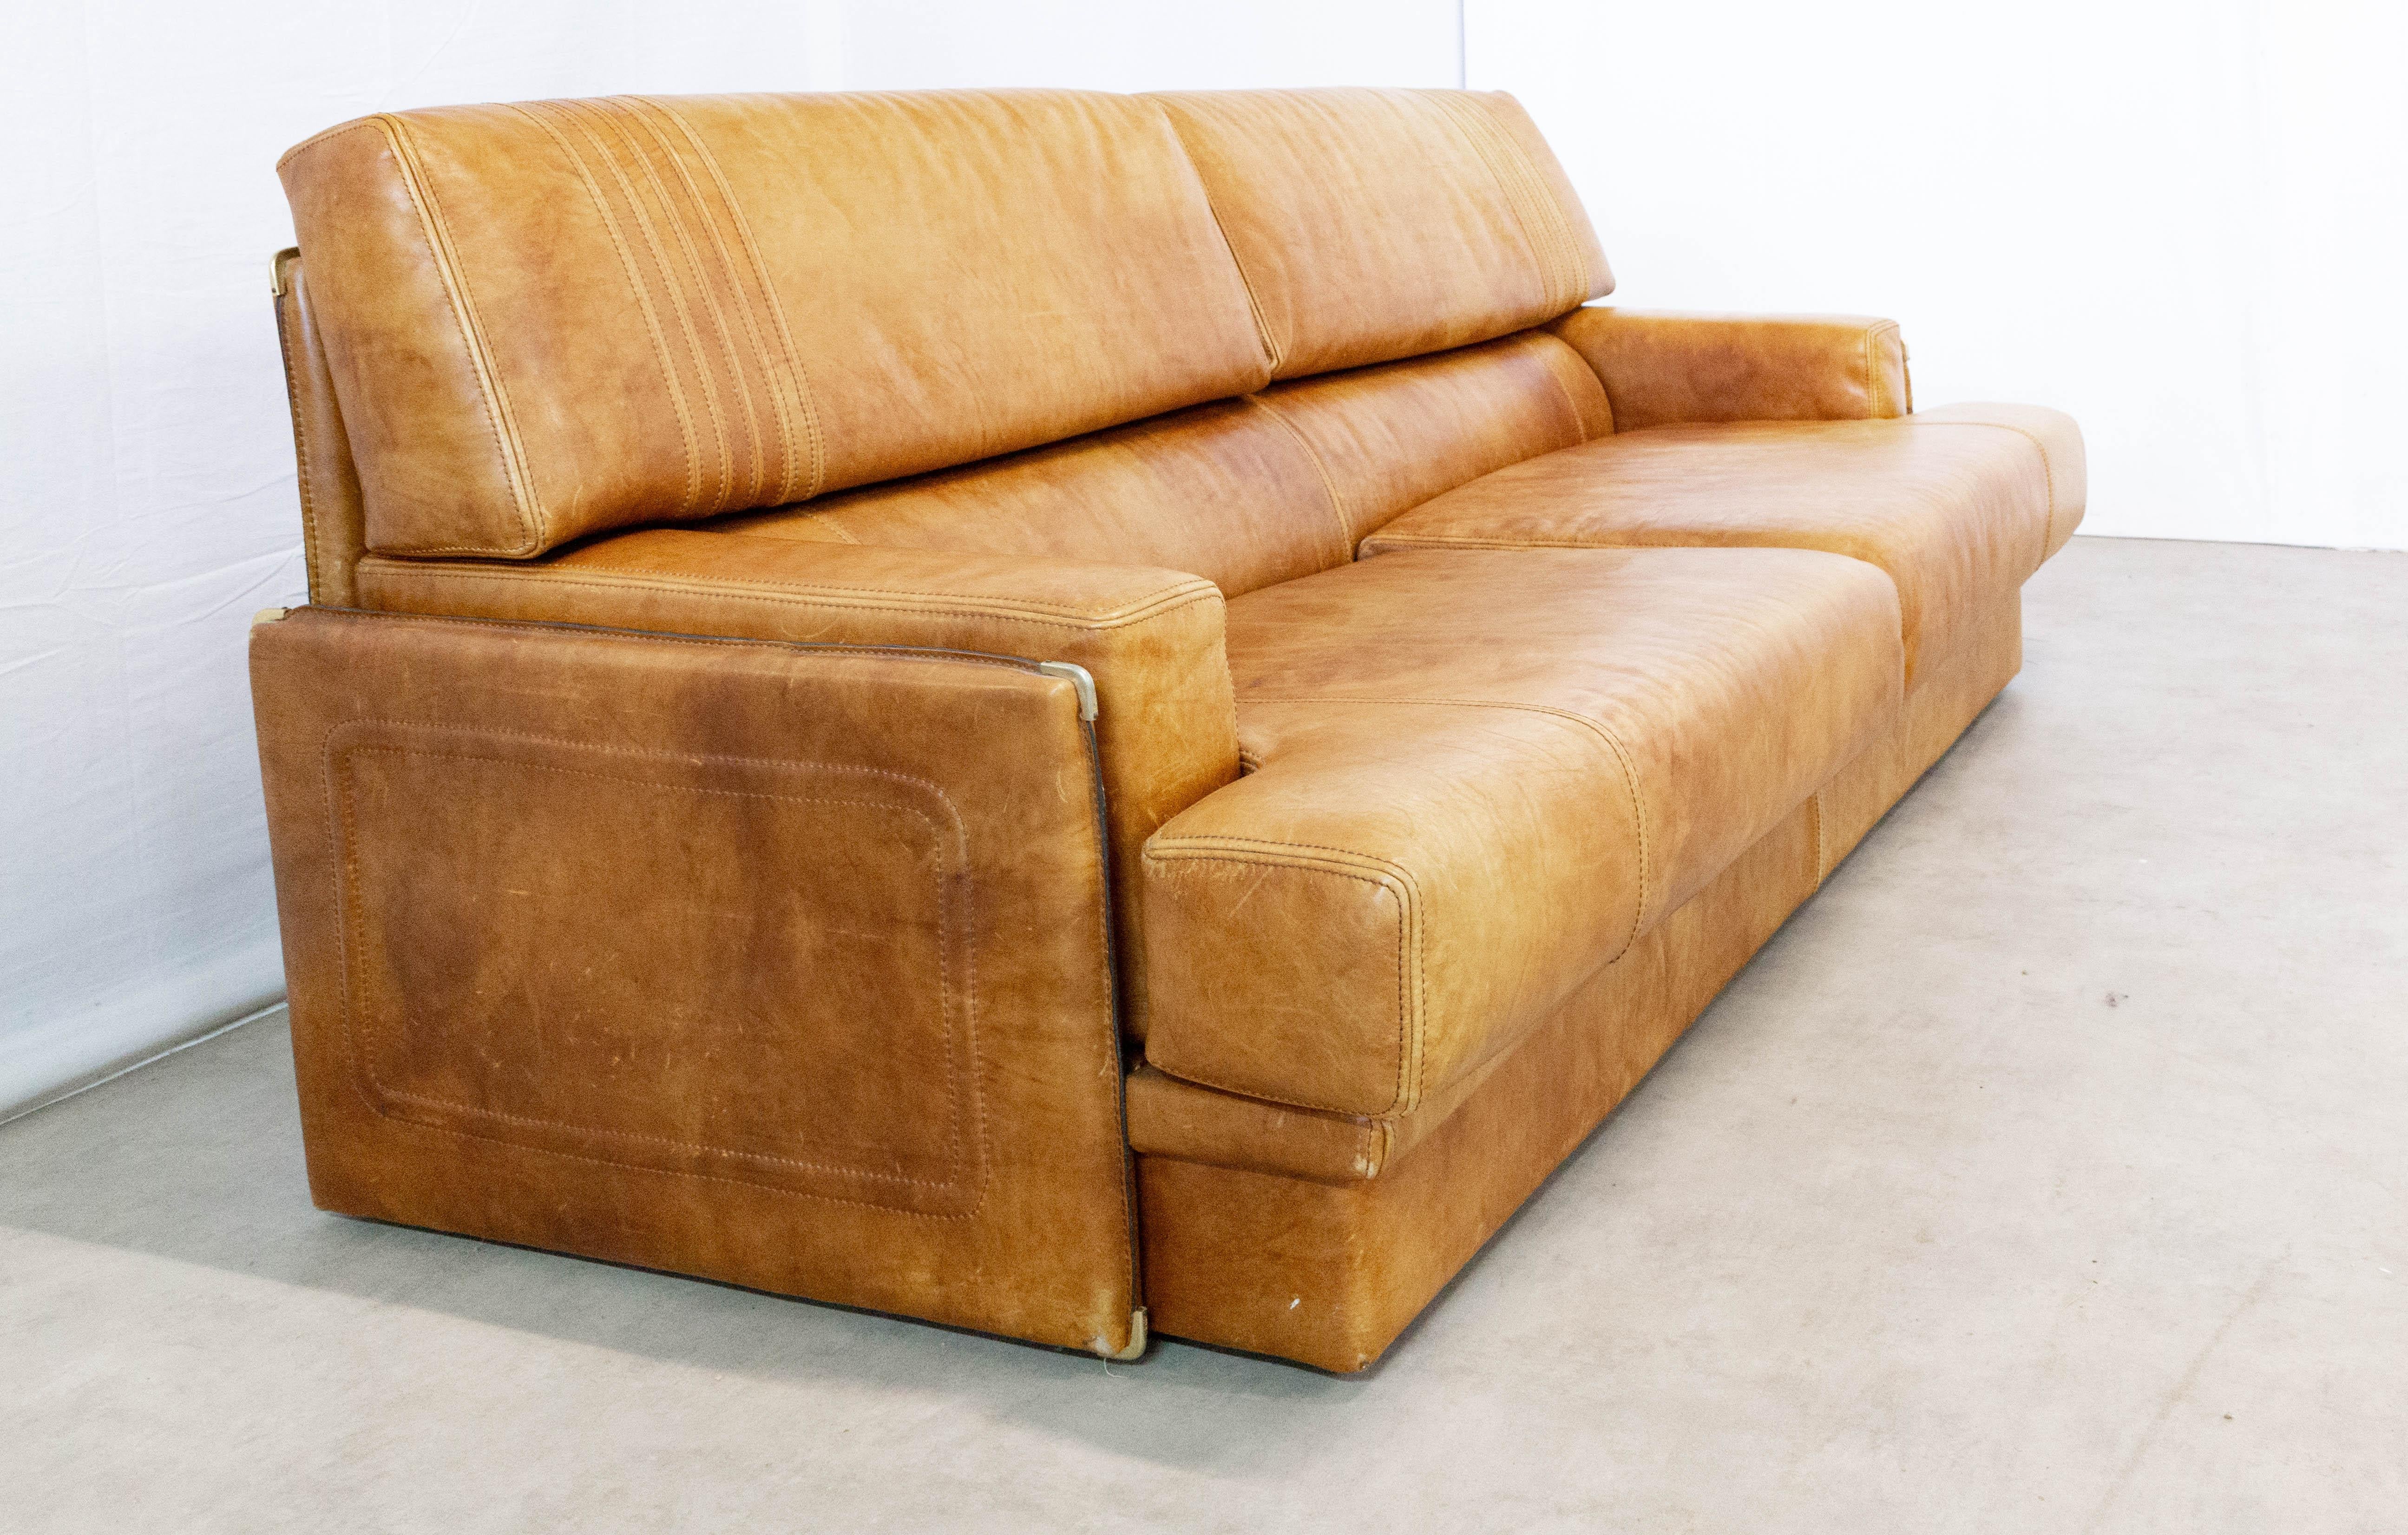 1970s leather sofa of Marco Milisich for Baxter Arcon
Large and comfortable vintage sofa in cognac leather with great patina. Heavy wrapped leather frame shelters soft seat and back cushions, all with decorative top-stitching.
Very